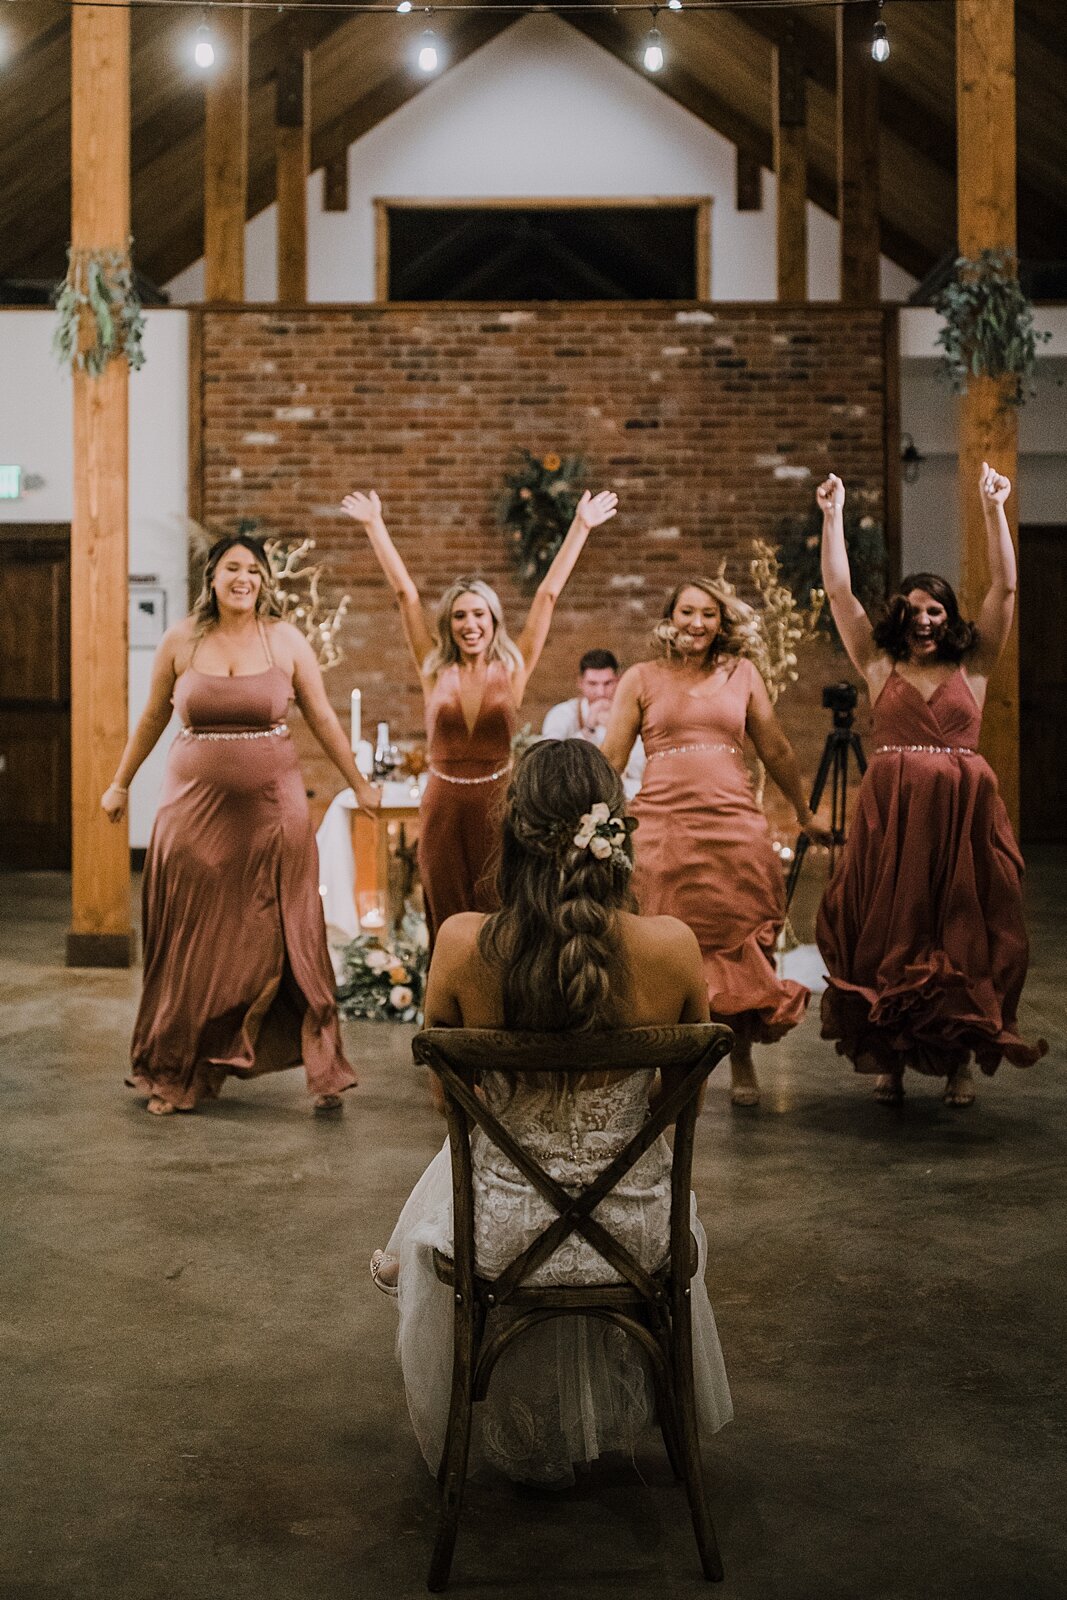 bridesmaids song and dance routine to the bride, the barn at sunset ranch in buena vista co, buena vista colorado wedding, the barn at sunset ranch wedding, buena vista colorado barn wedding venue